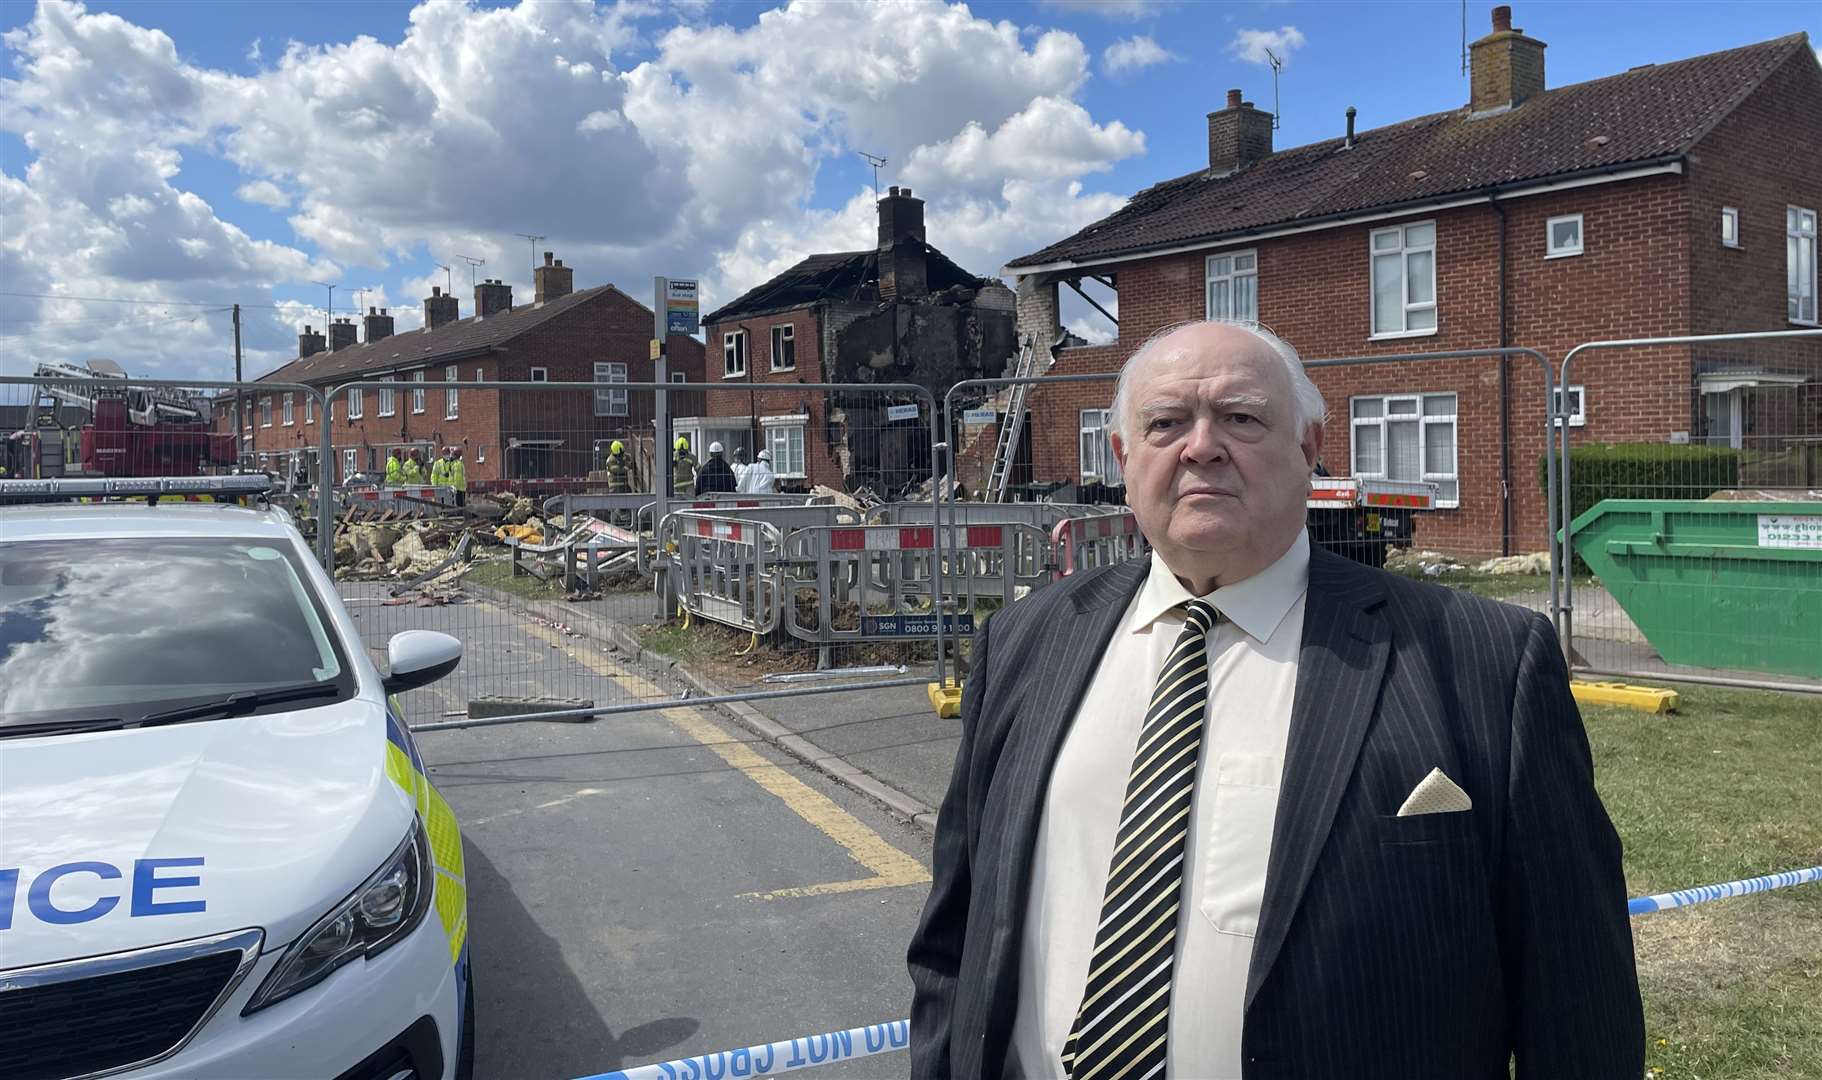 Cllr Gerry Clarkson visited the explosion site today